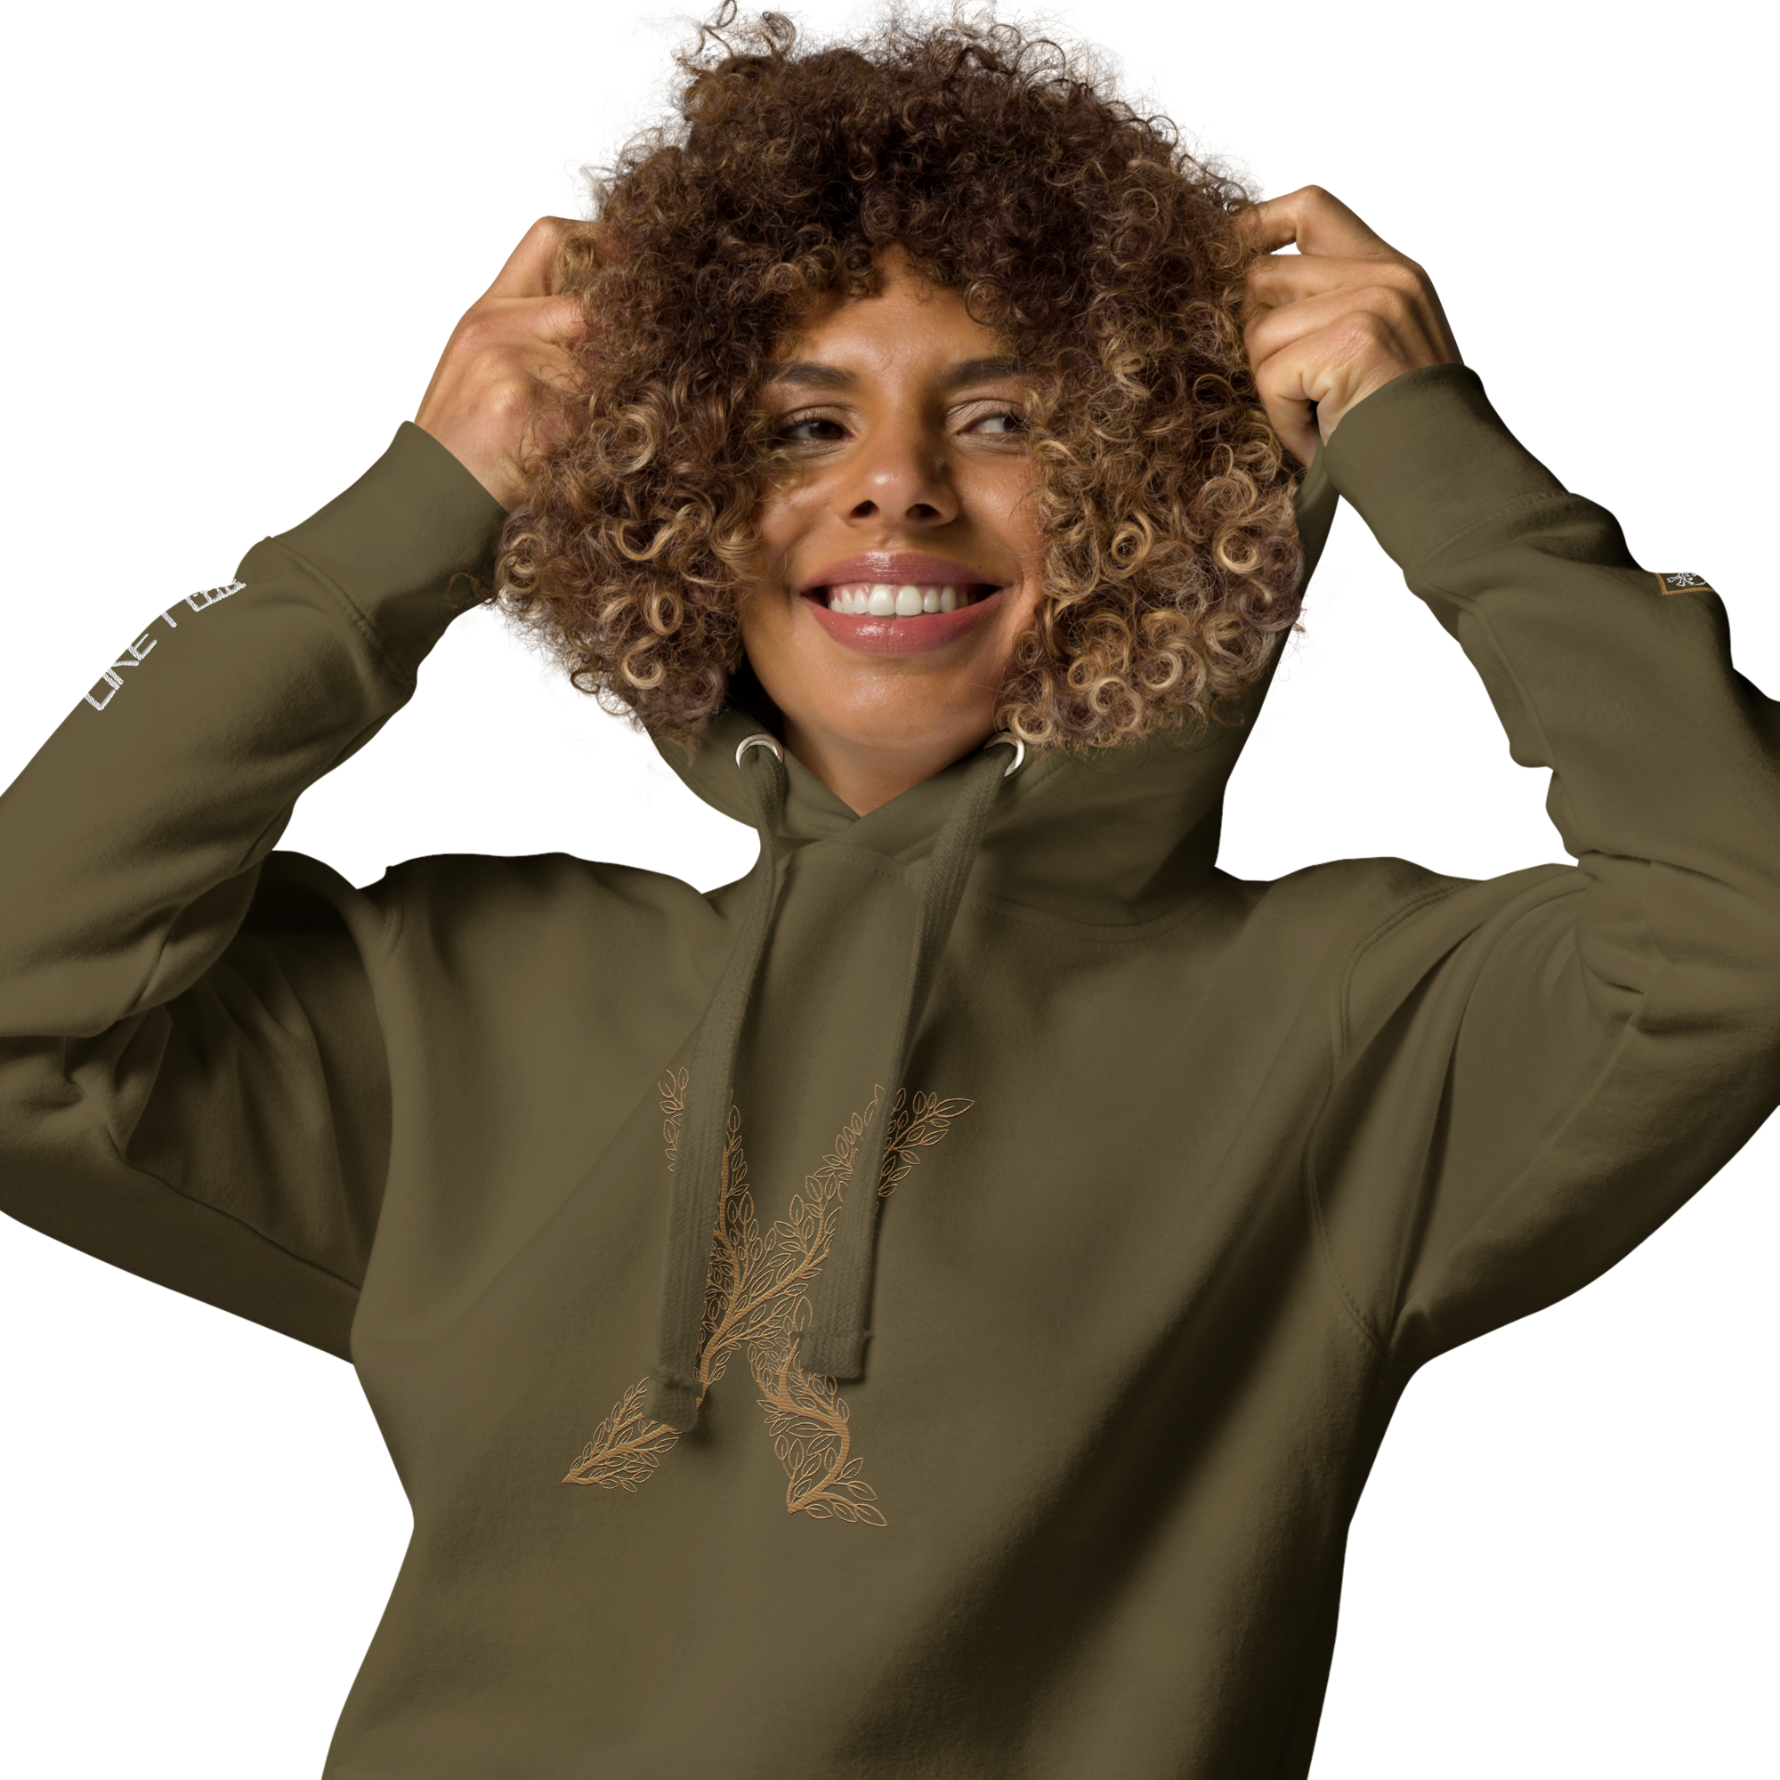 unisex-premium-hoodie-military-green-zoomed-in-658a20cb38c5c